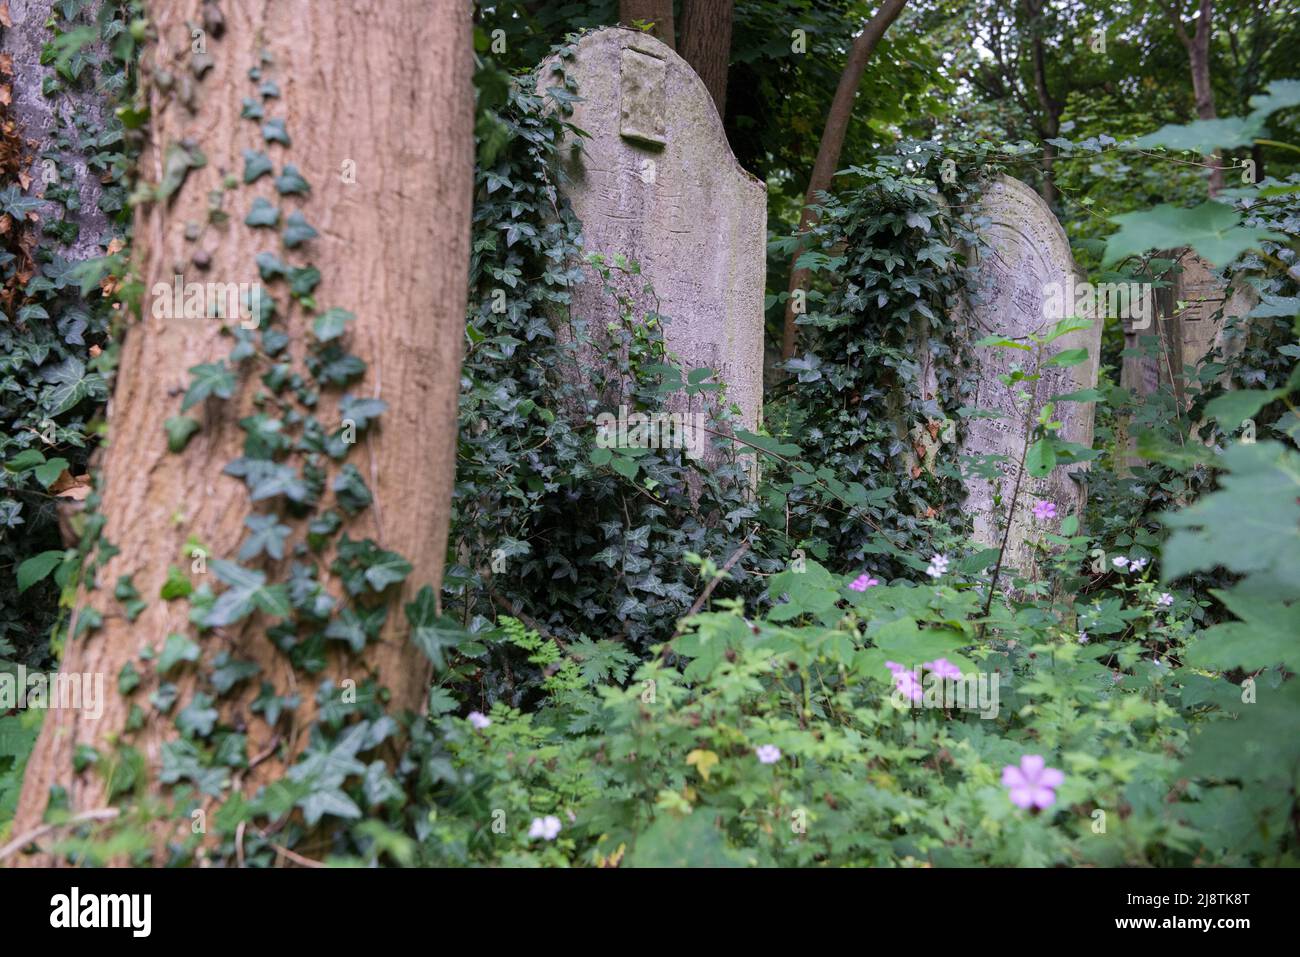 London, 23/08/2017: Tower Hamlets Cemetery Park is the most urban woodland in London, and Tower Hamlets' only dedicated woodland park. Historically it is one of London's magnificent seven cemeteries, closing to burials and becoming a public park in 1966.  © Andrea Sabbadini Stock Photo